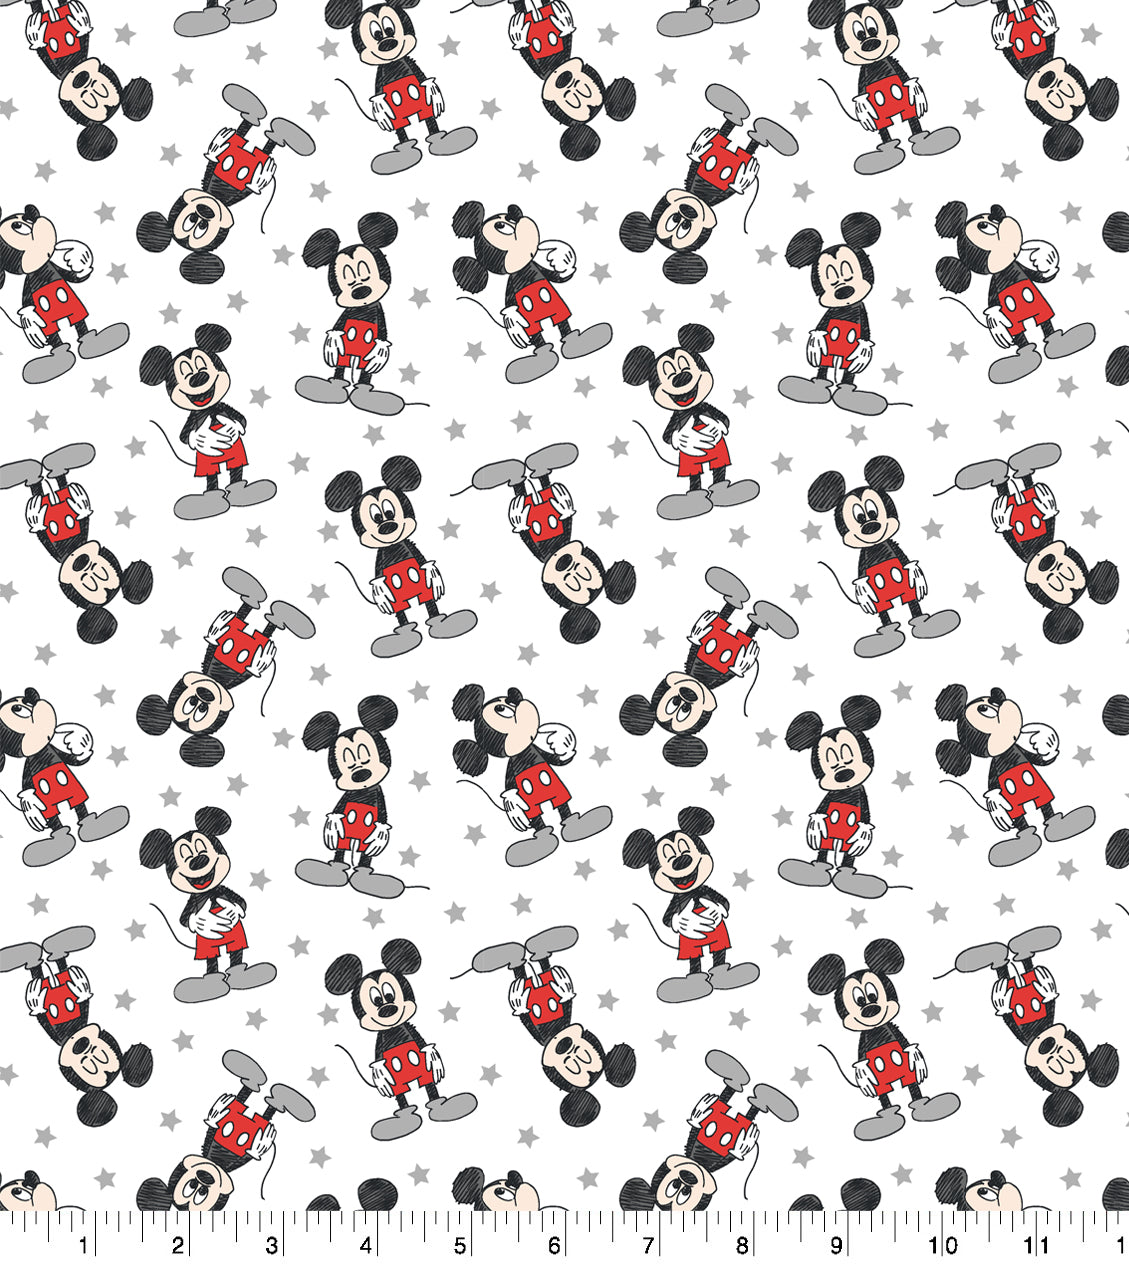 Disney Licensed Fabric Vintage Mickey and Minnie Mouse in 